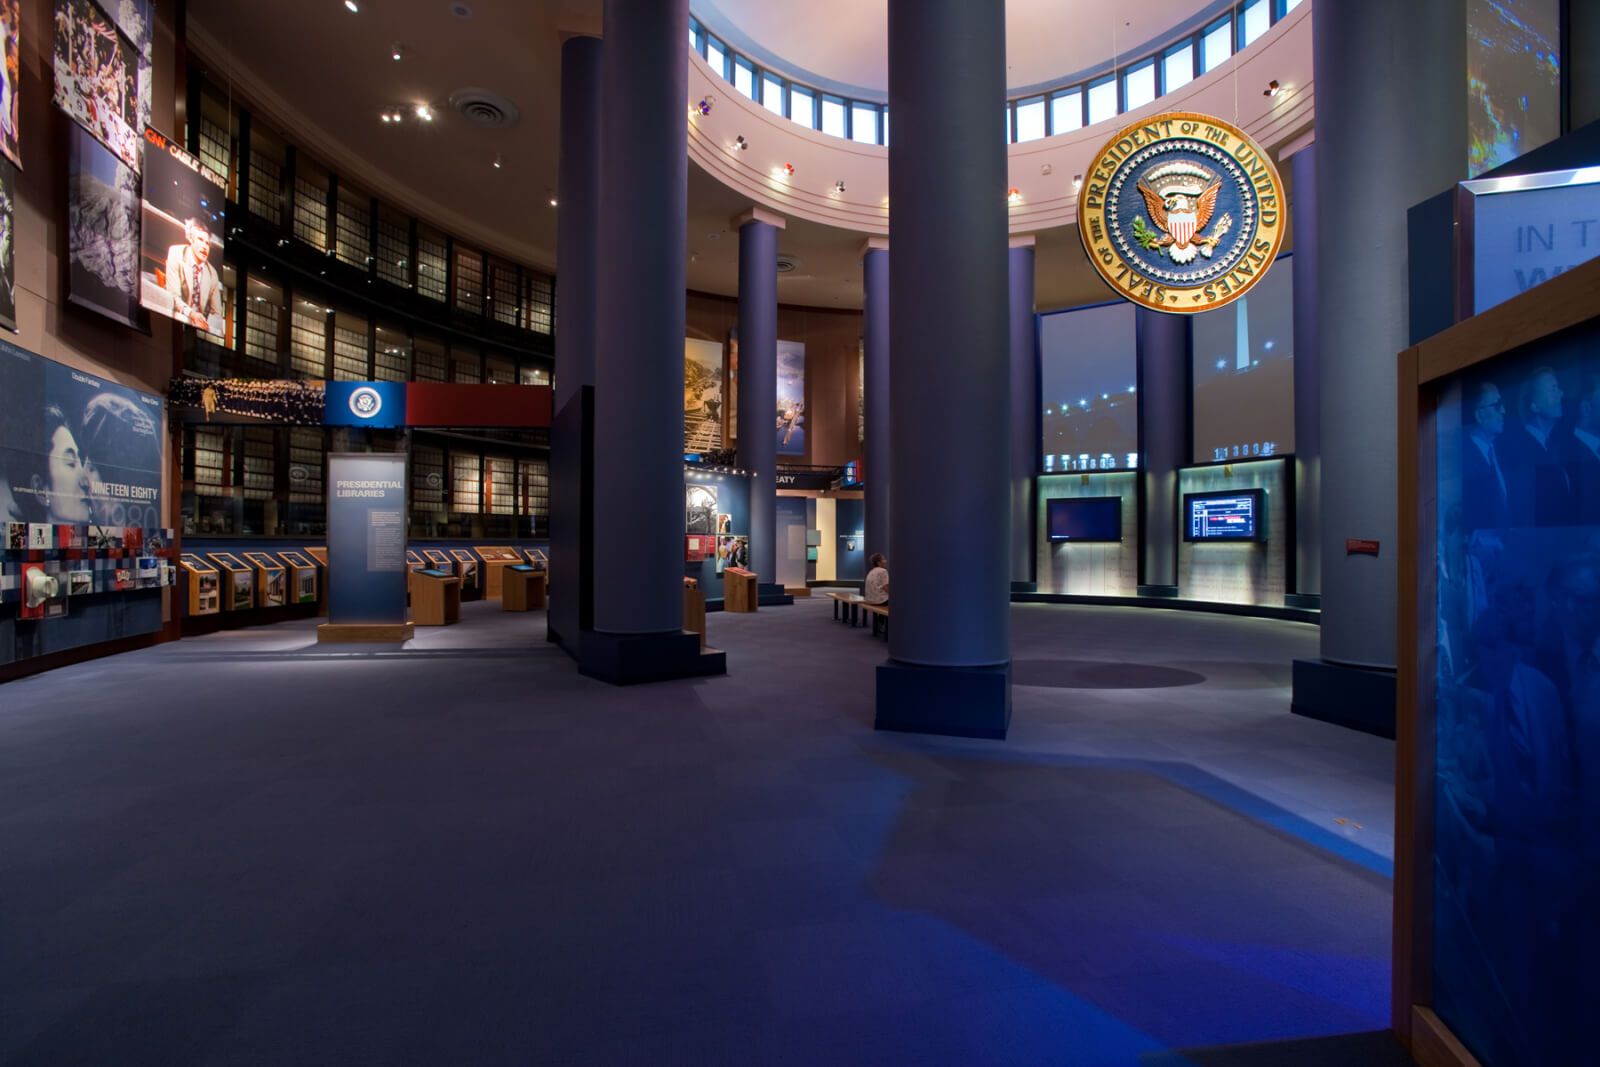 Jimmy Carter Presidential Museum and Library